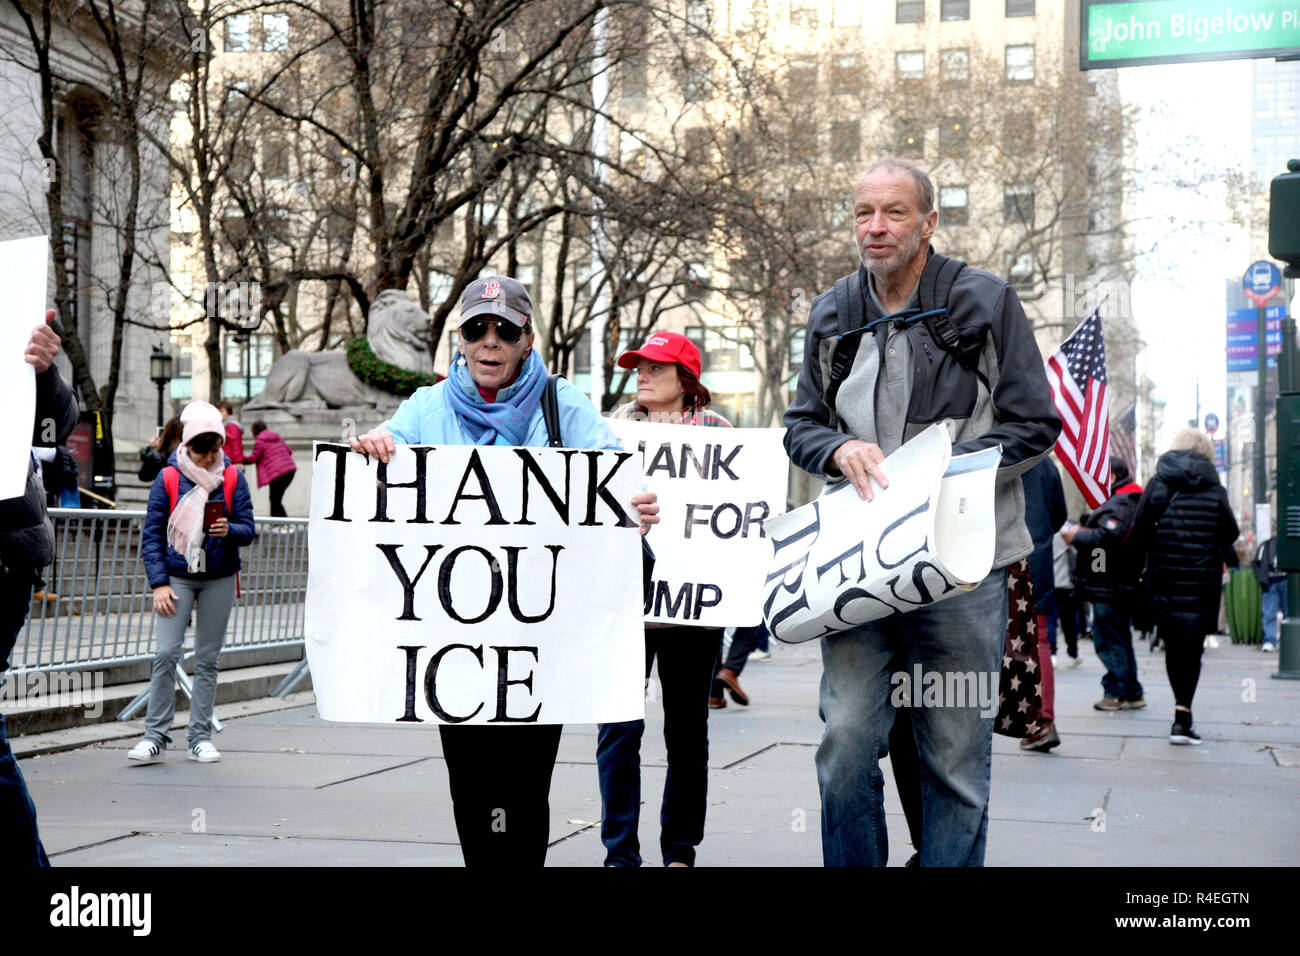 New York City, New York, USA. 25th Nov, 2018. Die-hard supporters of Donald Trump who attend every Trump protest in New York City. The small band of MAGA supporters numbering between three (3) and six (6) persons, often counter-protest and shadow march the main group (s) when they are on the move. Credit: G. Ronald Lopez/ZUMA Wire/Alamy Live News Stock Photo